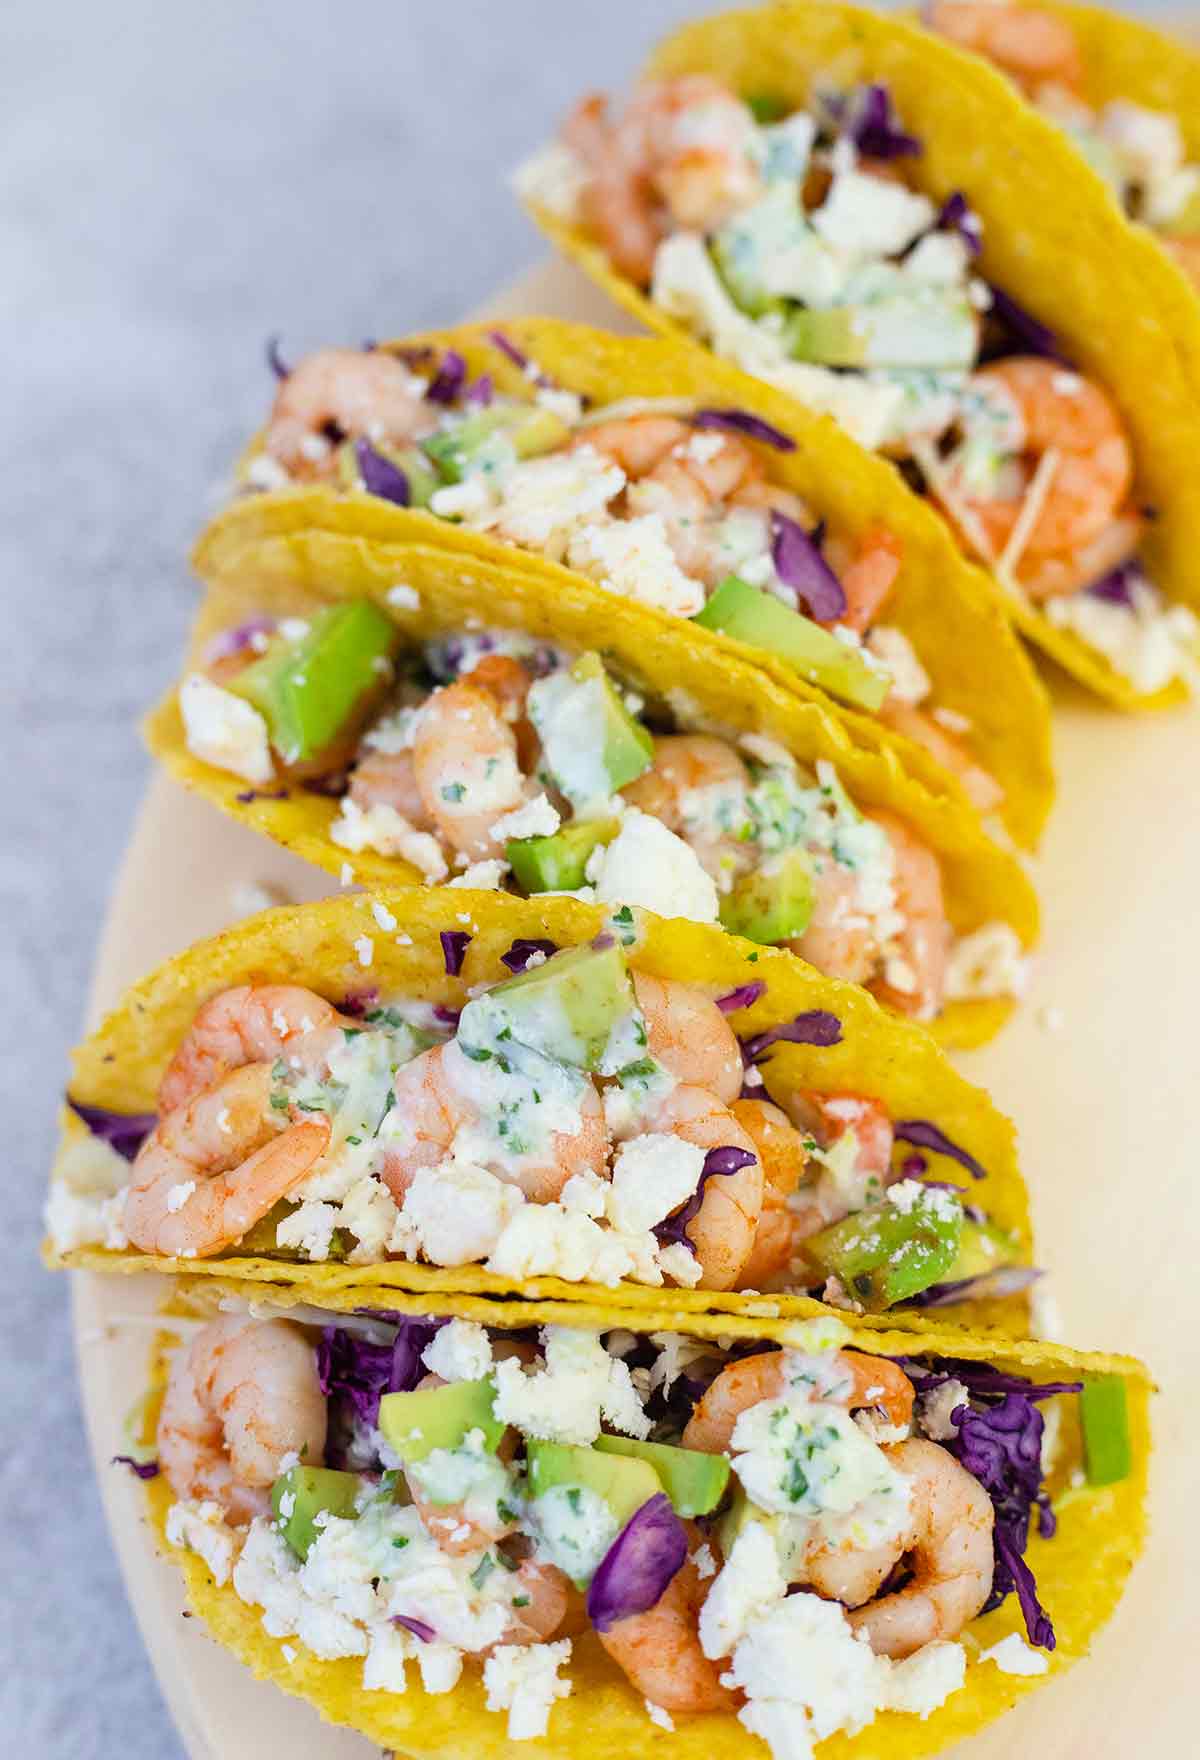 Mexican shrimp tacos topped with sour cream sauce.